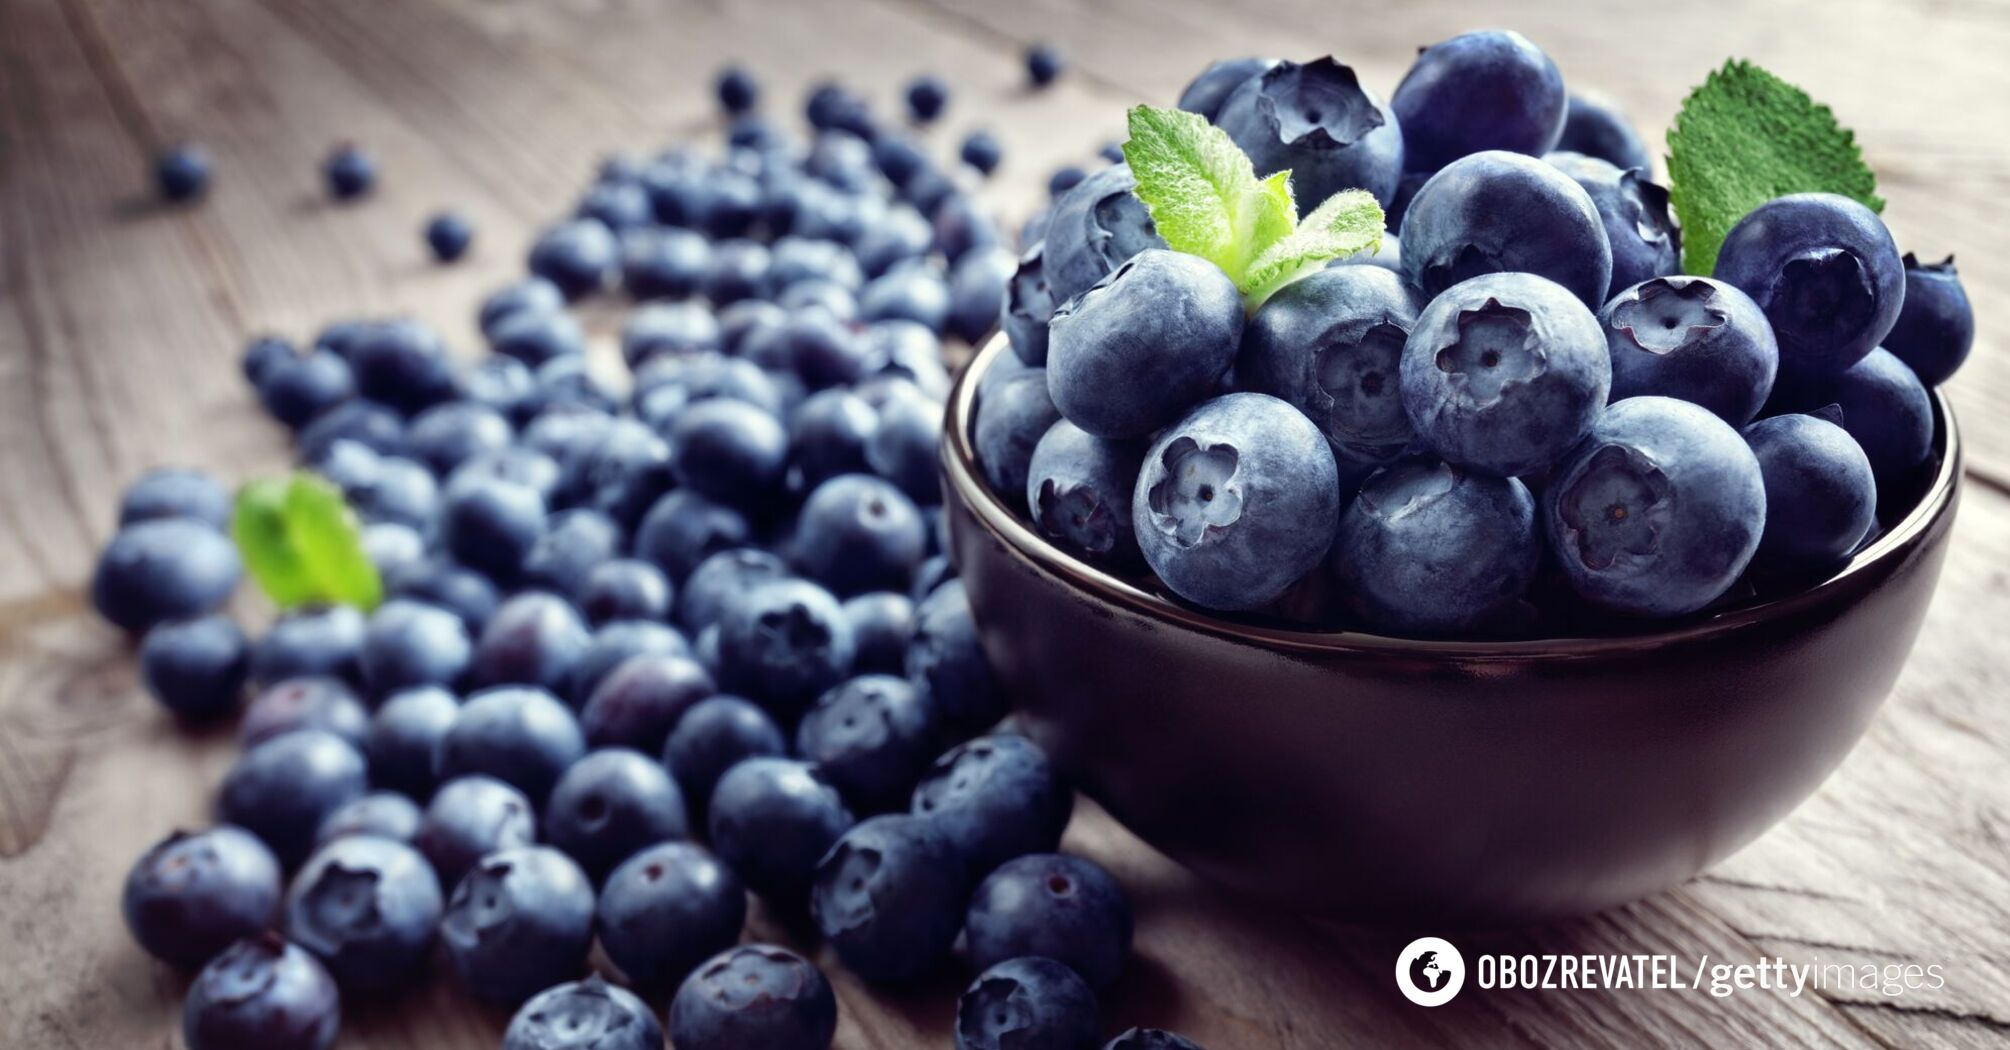 How to choose good blueberries at the market